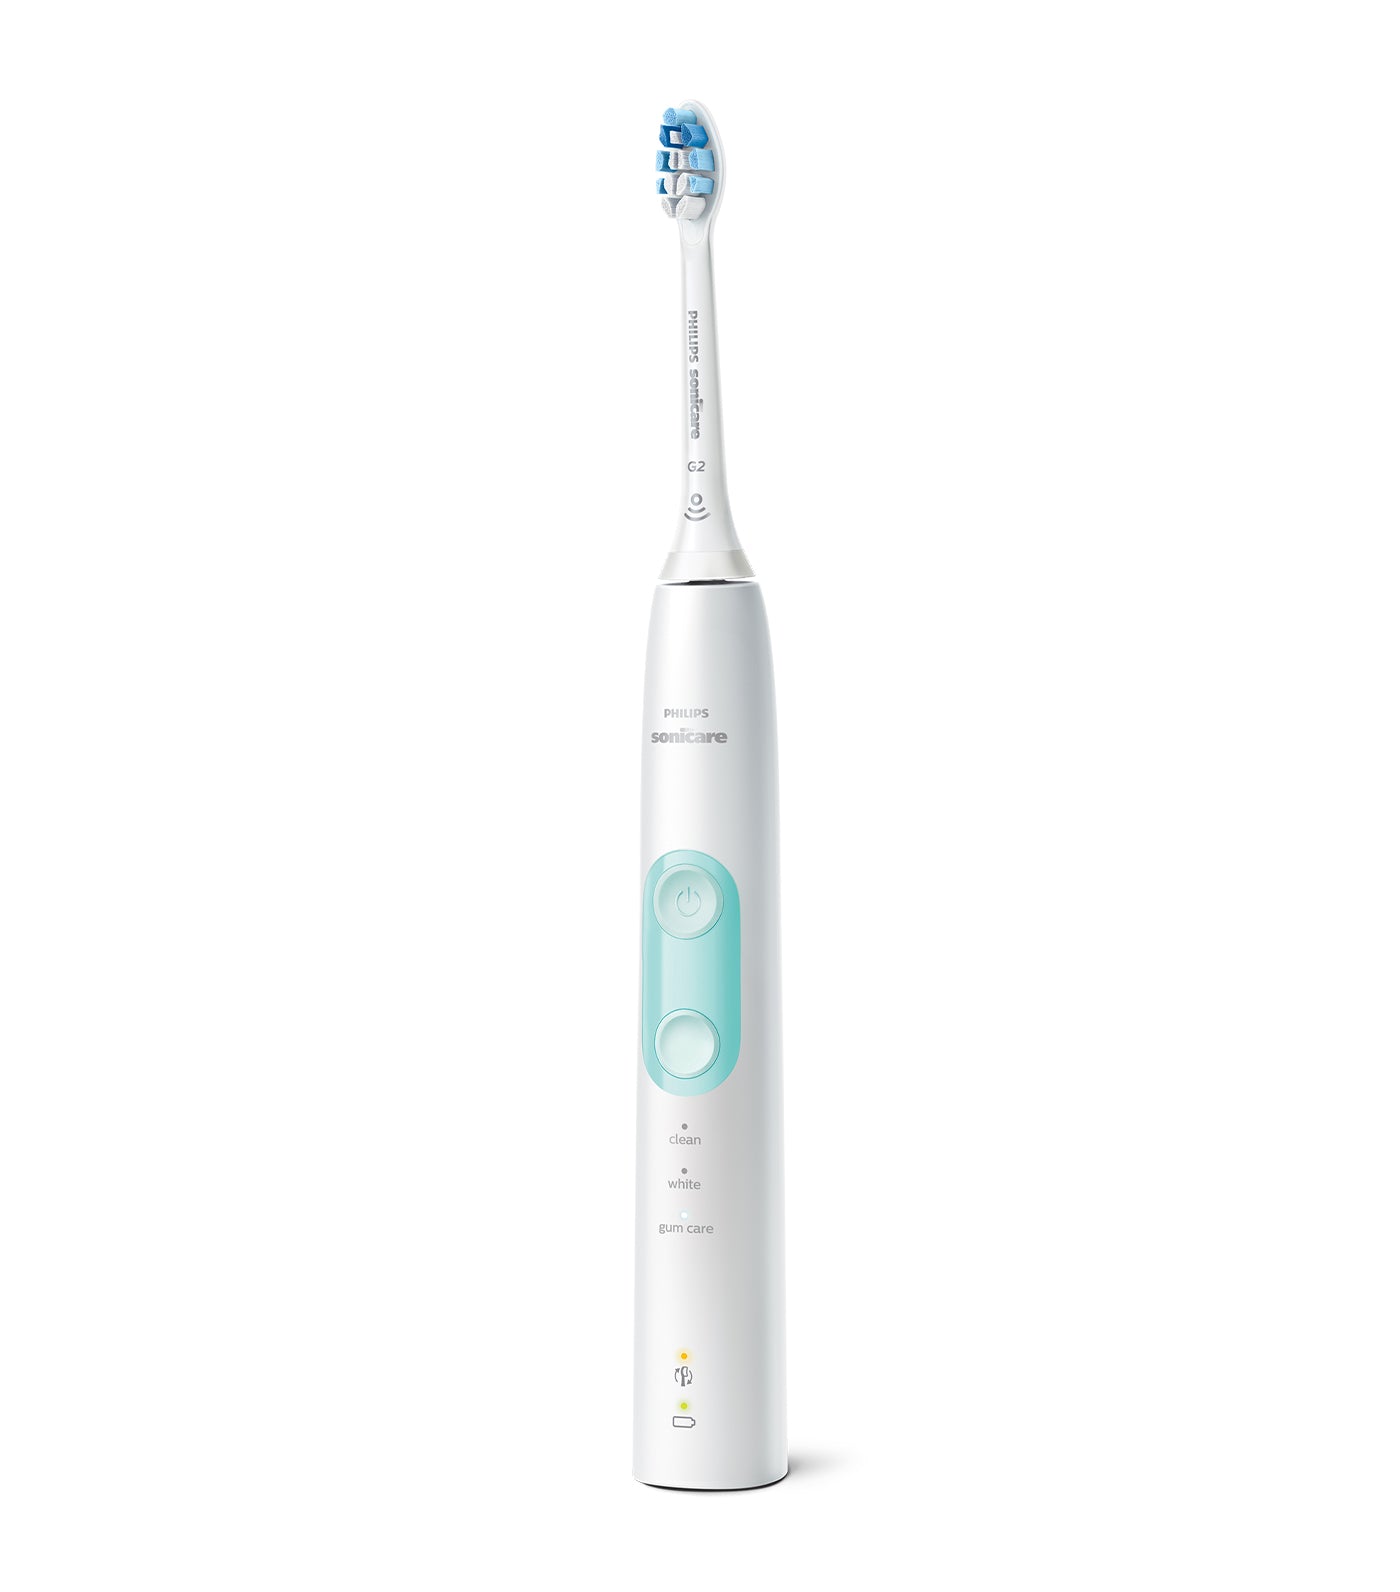 Sonicare ProtectiveClean 5100 Sonic Electric Toothbrush White